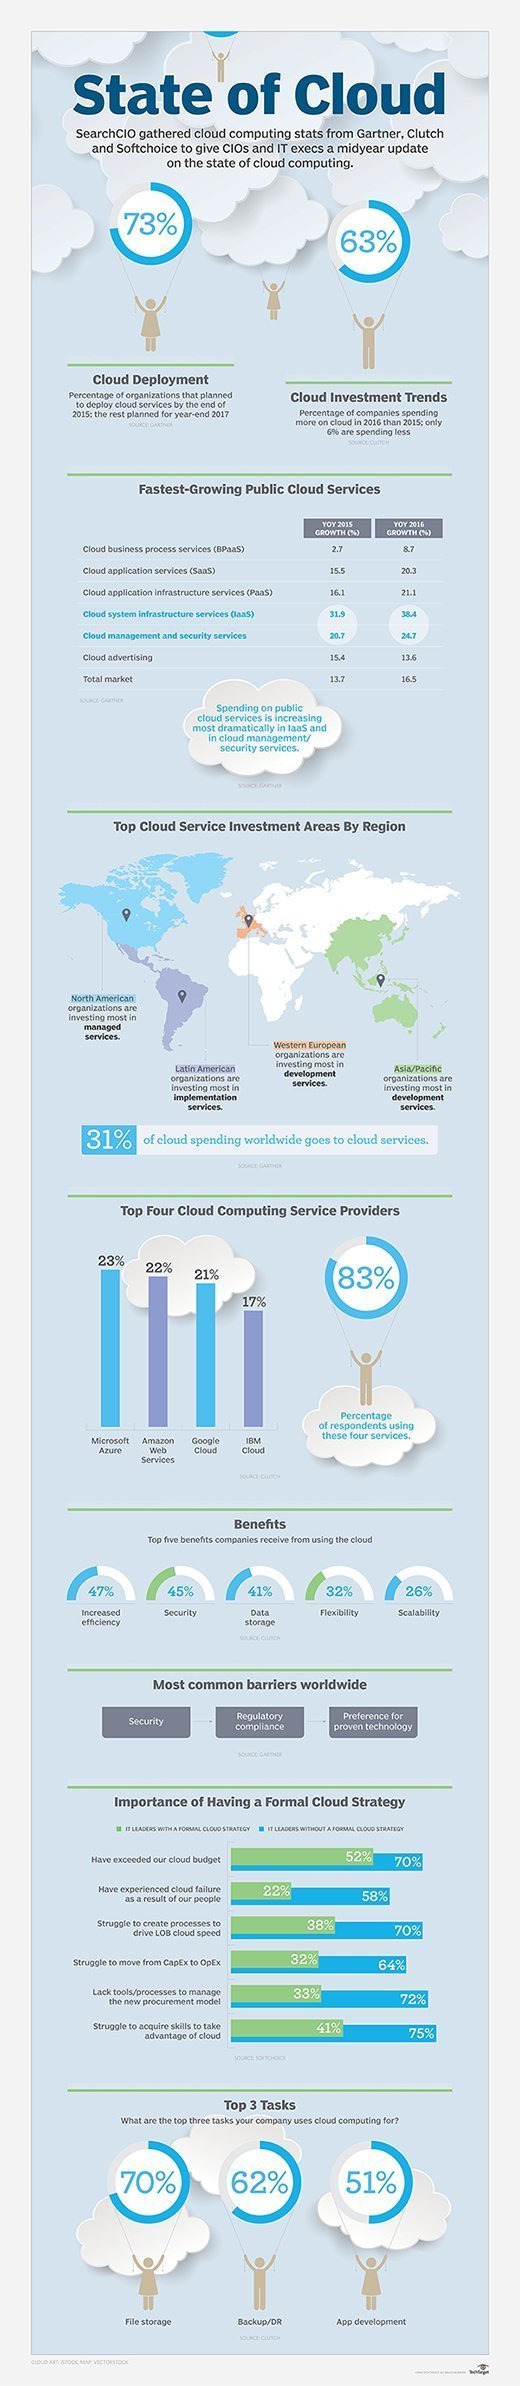 State of Cloud infographic